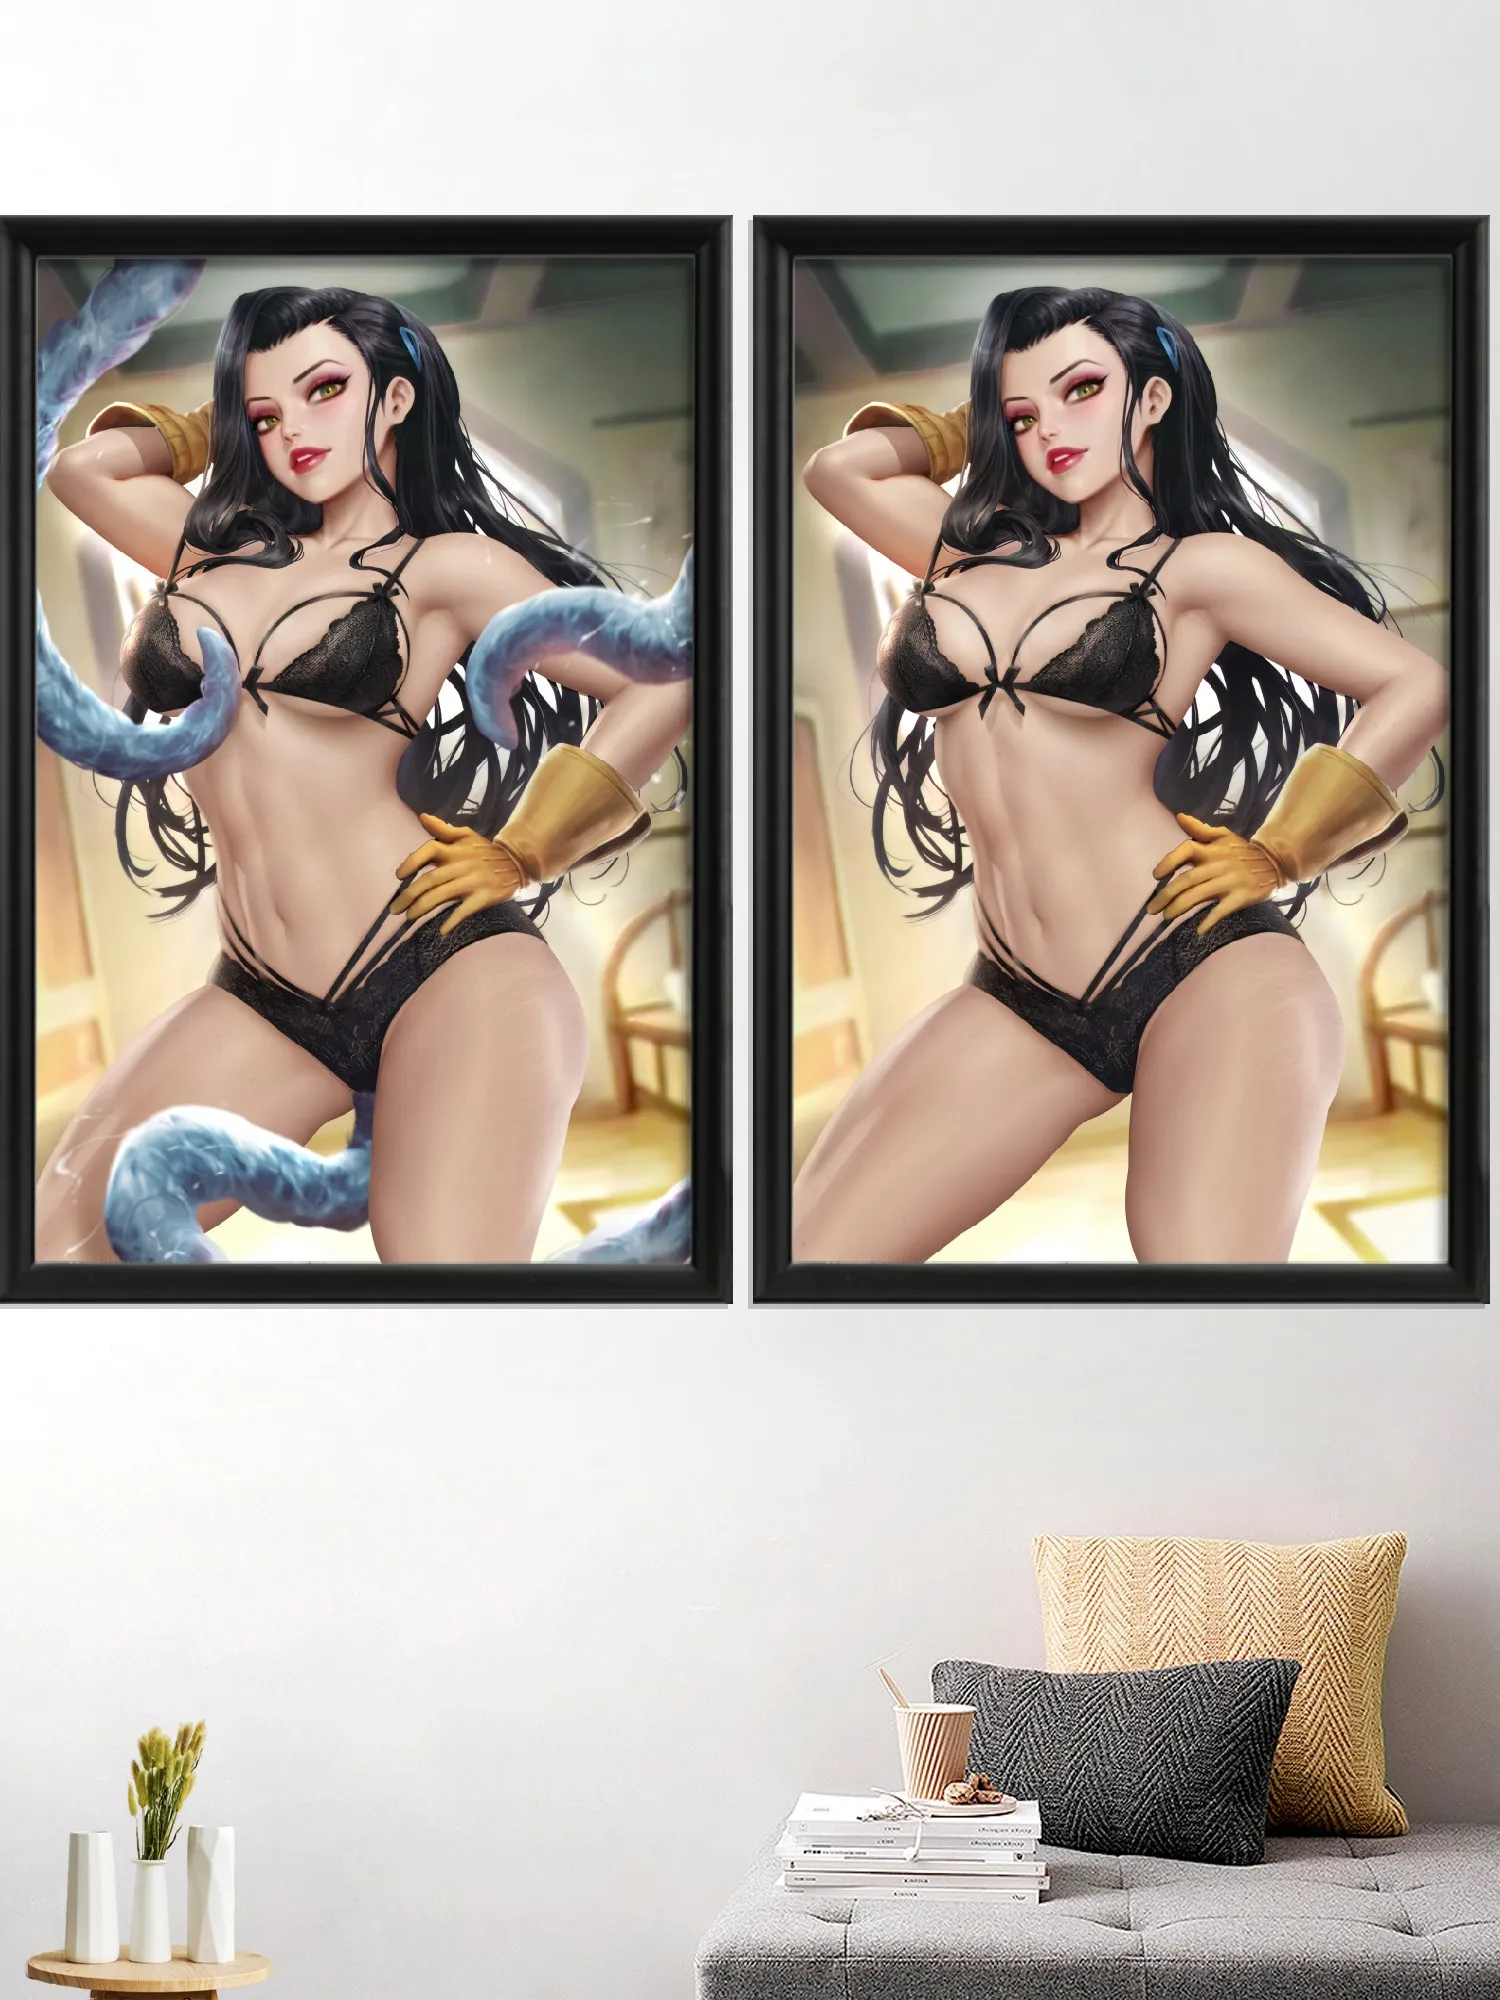 Asami Suki Anime Cartoon Sexy Nude Girl Game Avatar Art-Poster Silk Decoration Home Wall Living-Bedroom Custom Picture Prints picture